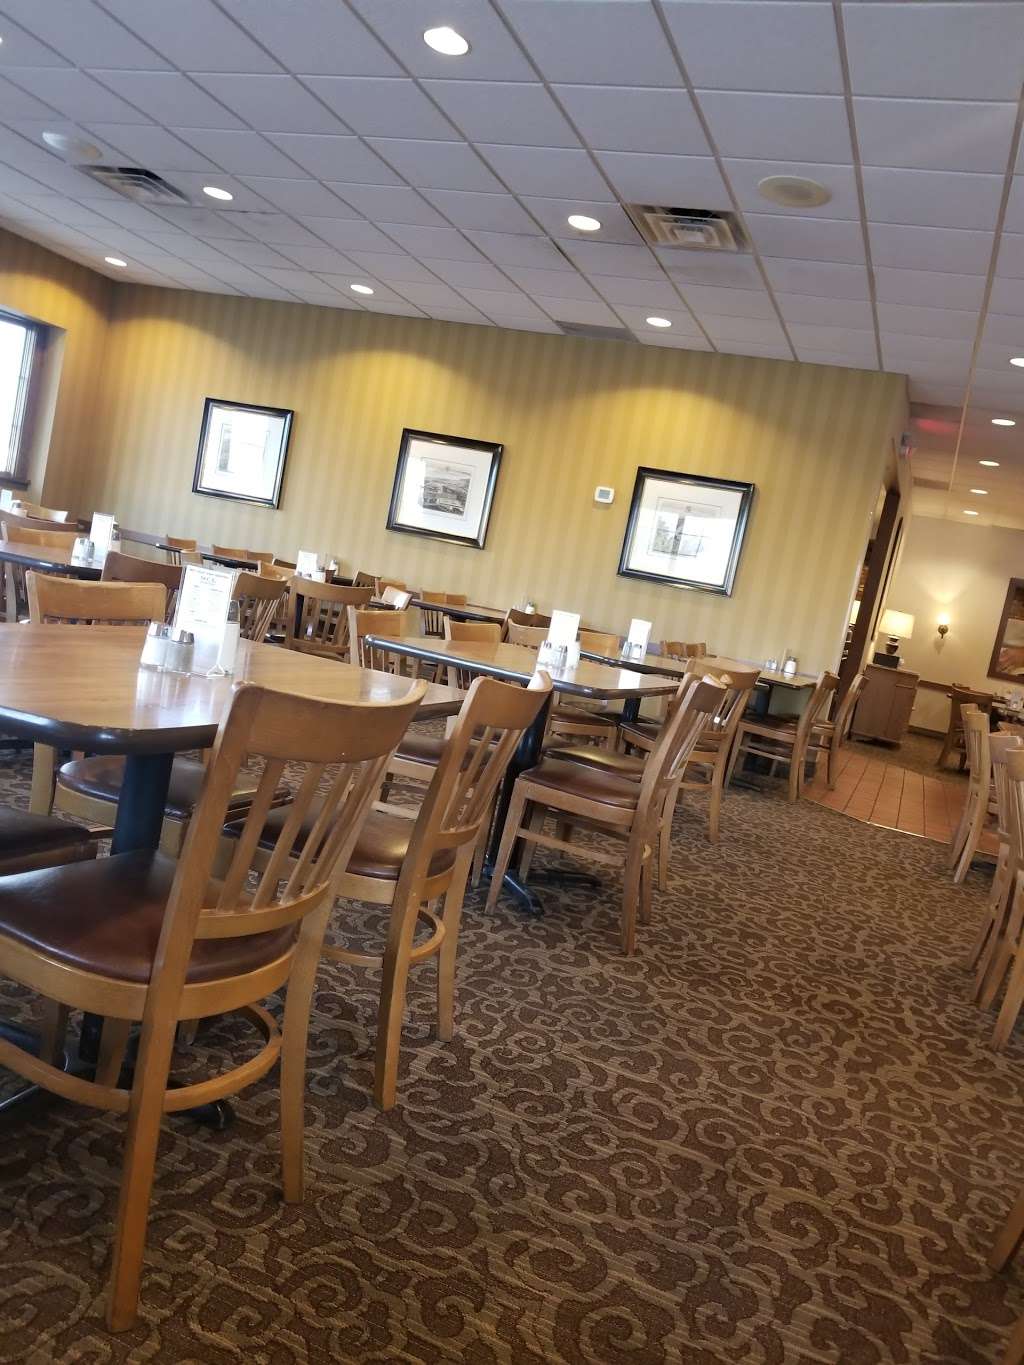 MCL Restaurant & Bakery Southside | 3630 S East St, Indianapolis, IN 46227 | Phone: (317) 783-2416